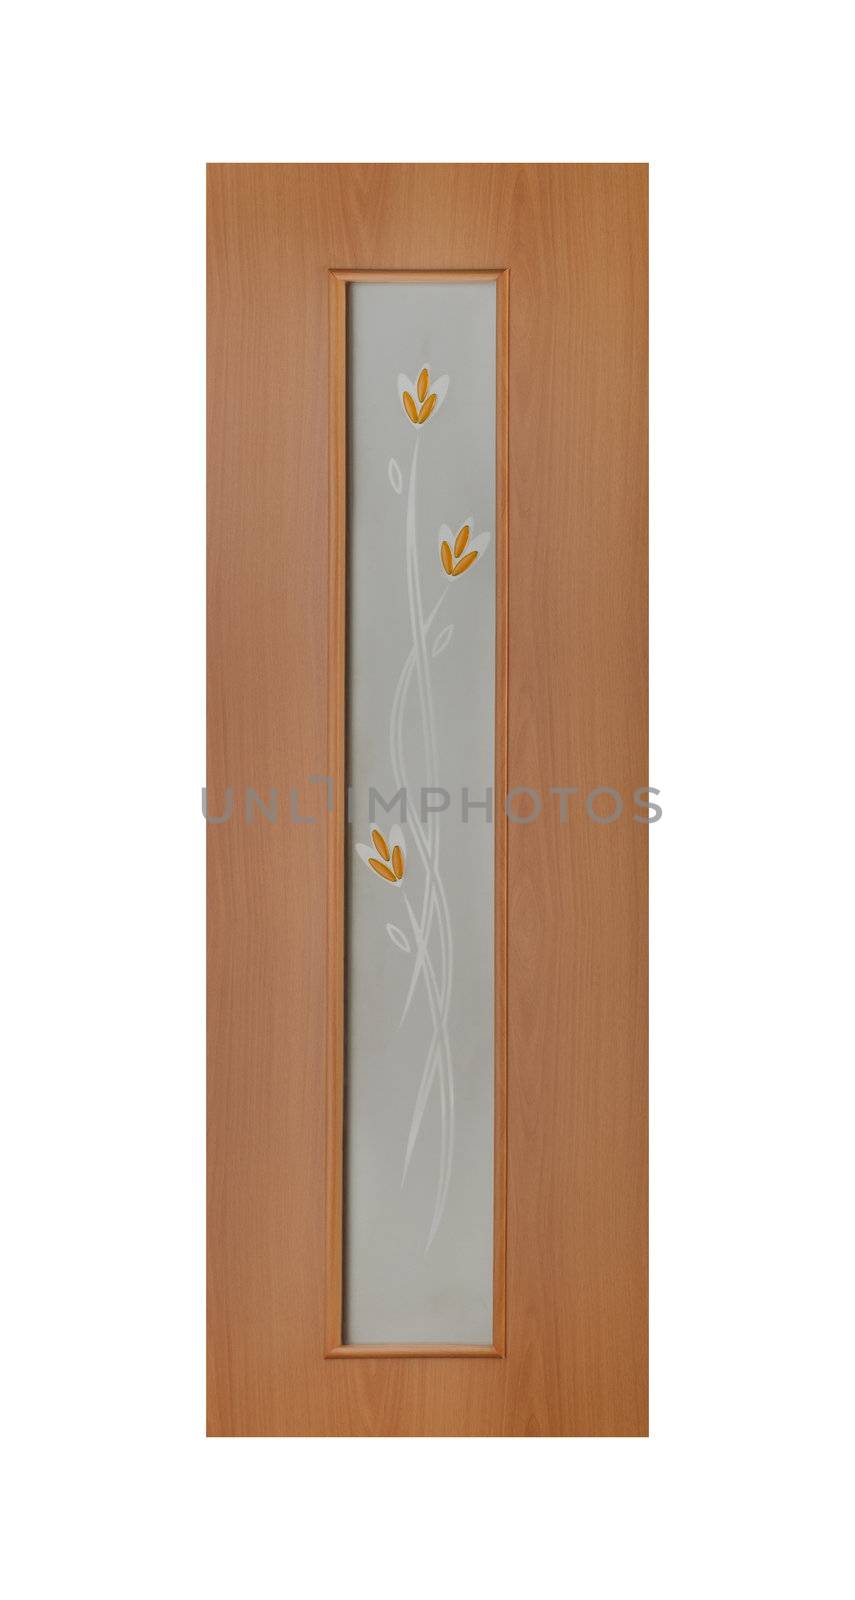 Common house interior door isolated on white background